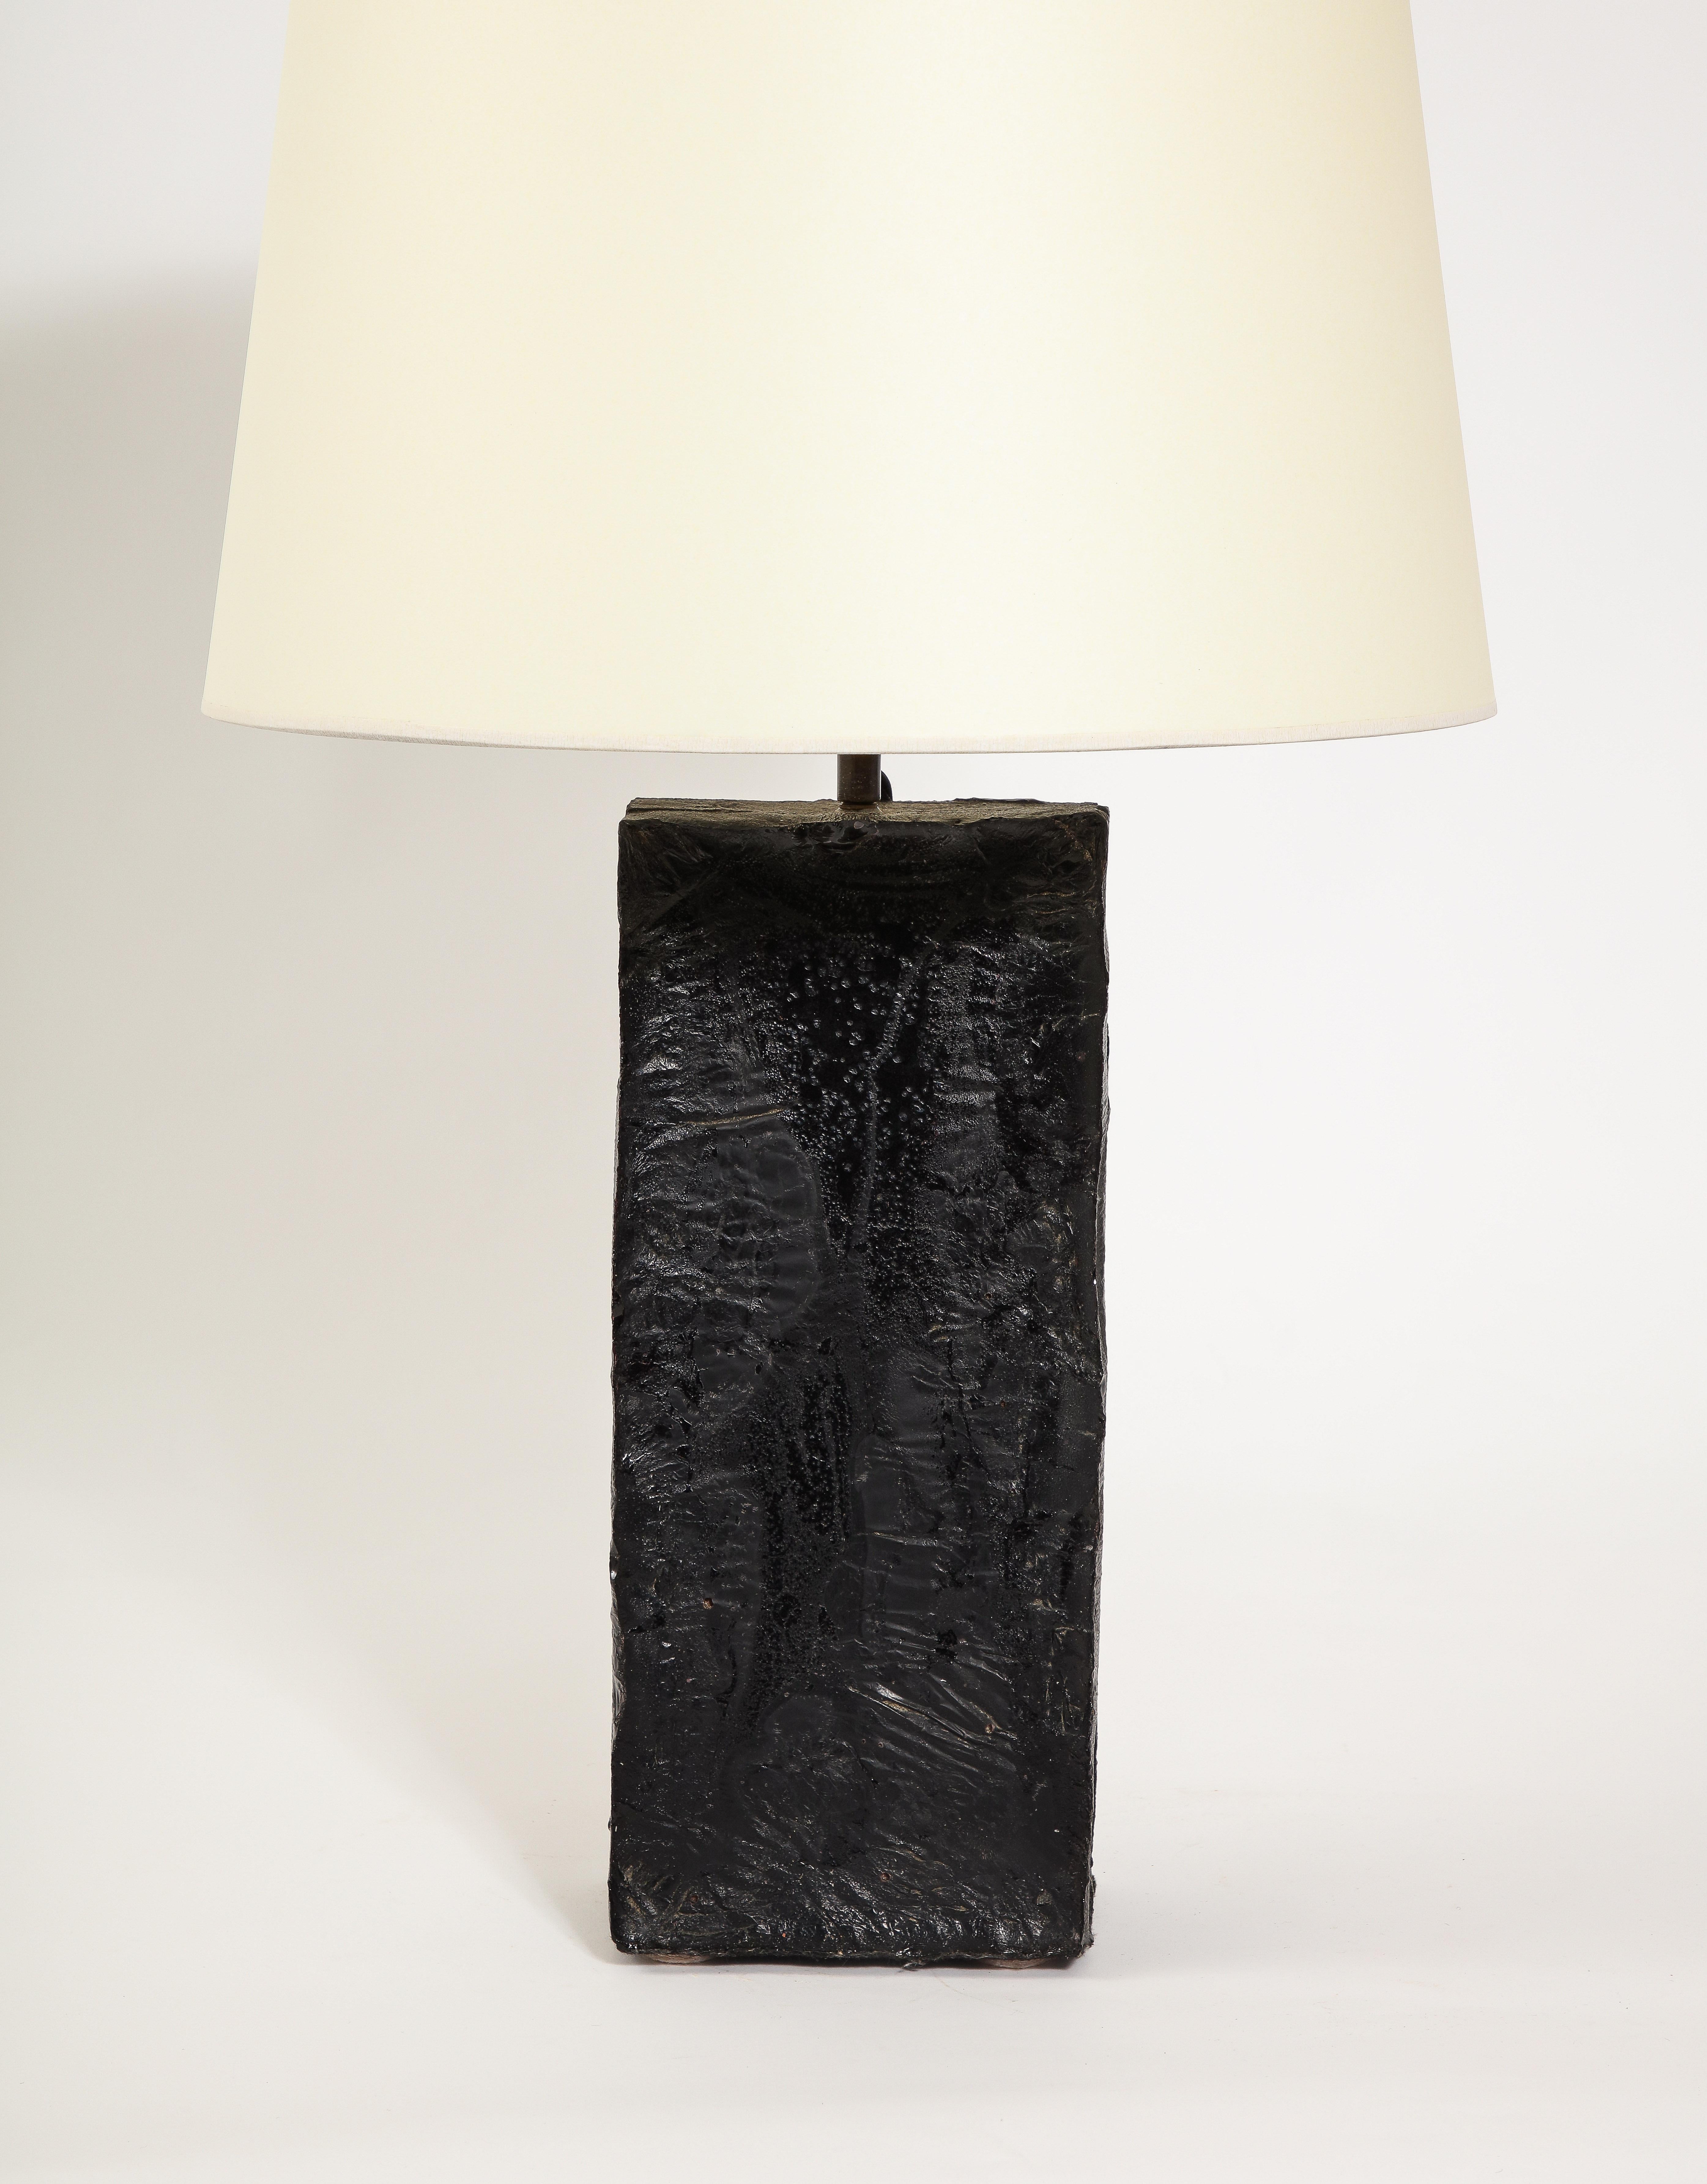 Heavy solid glass cast black table lamp with a rough texture

19x6x4 Base Only

